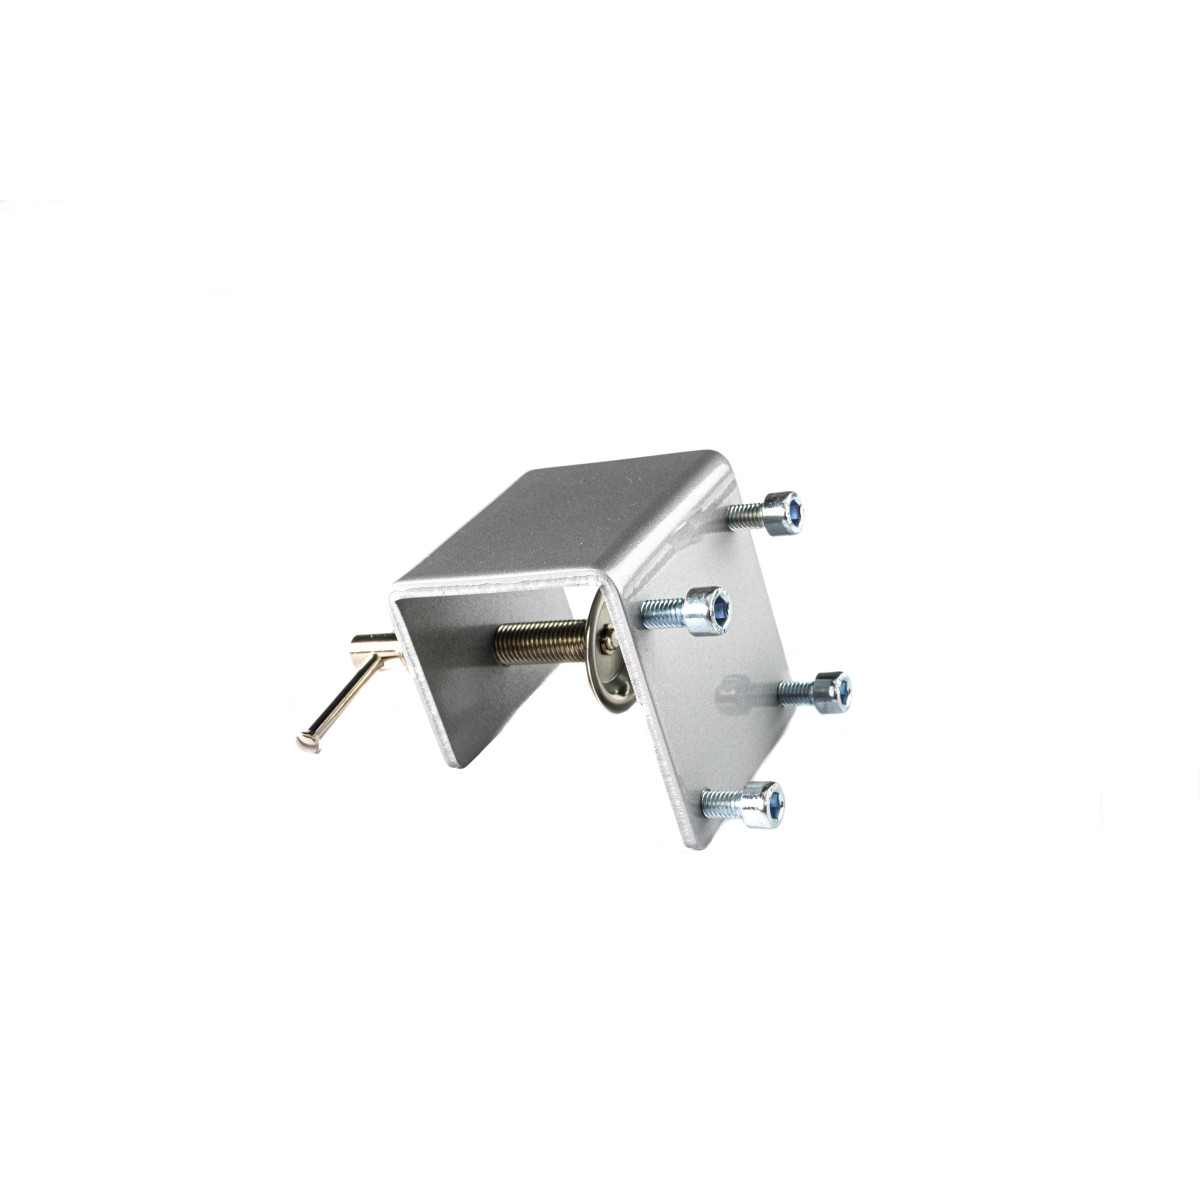 Variation:Table clamp (0-44 mm)